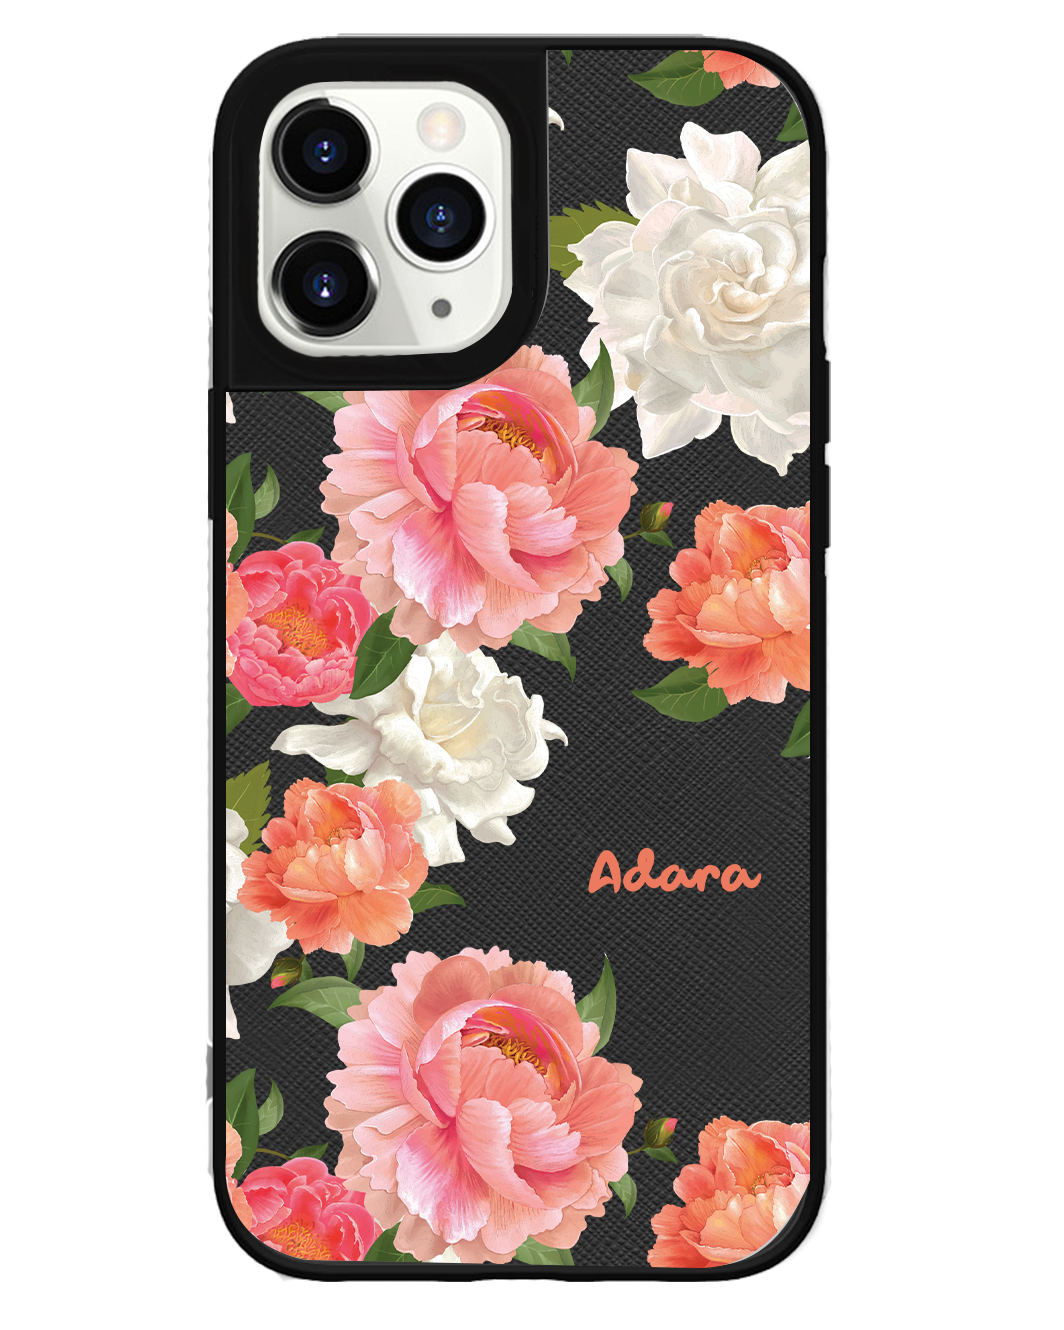 iPhone Leather Grip Case - August Peony